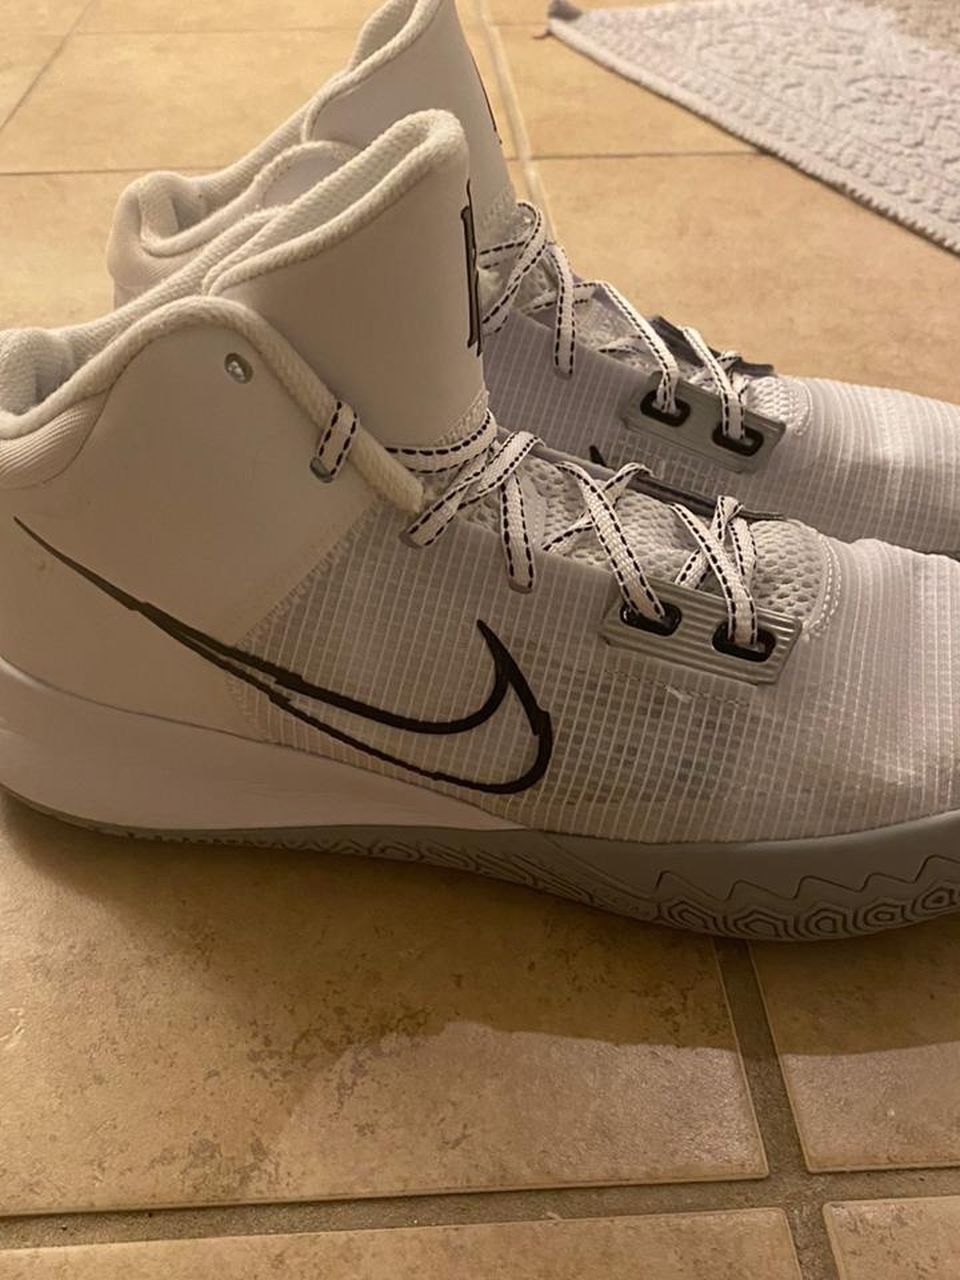 White Kyrie Fly Trap 4, Size 10